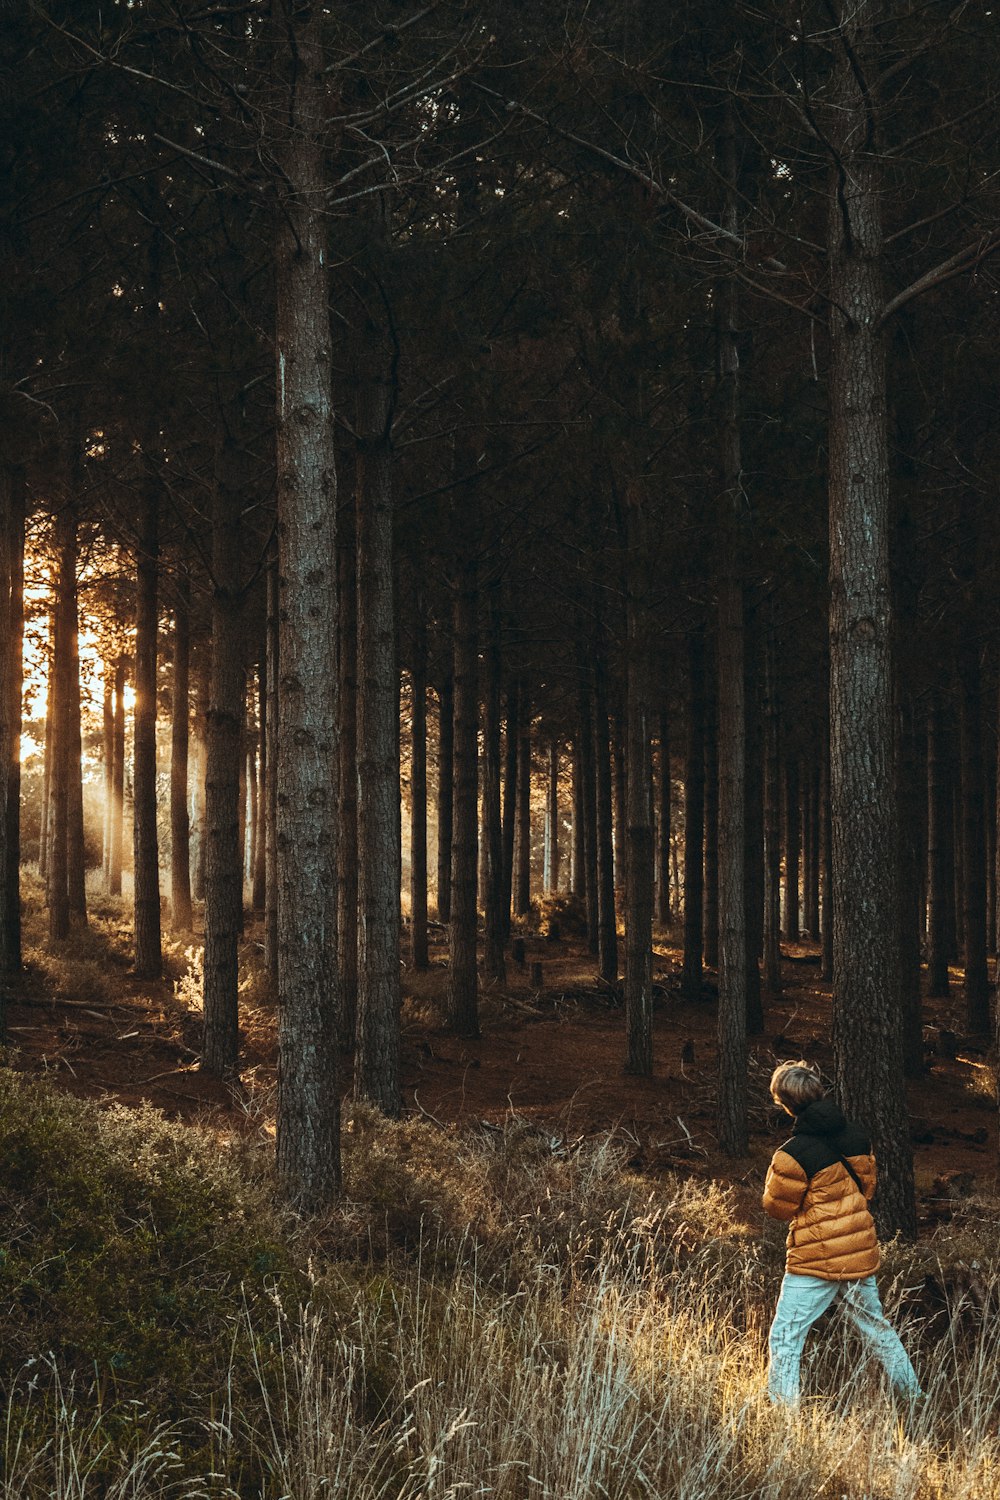 a person walking through a forest with tall trees